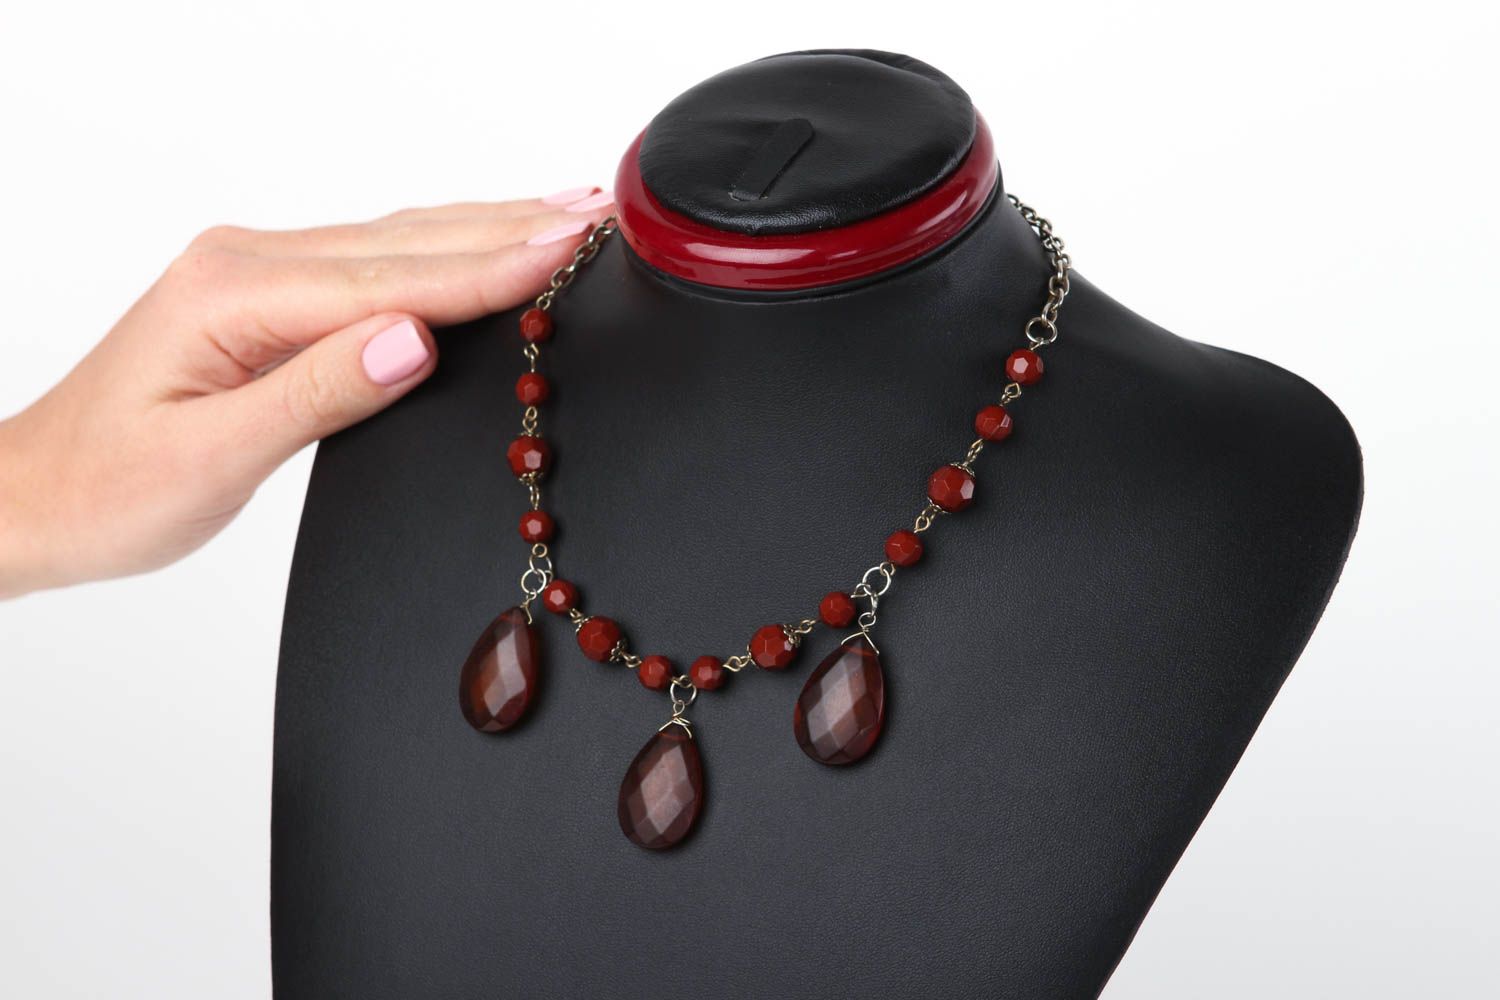 Handmade necklace bead necklace designer jewelry fashion accessories for women photo 5